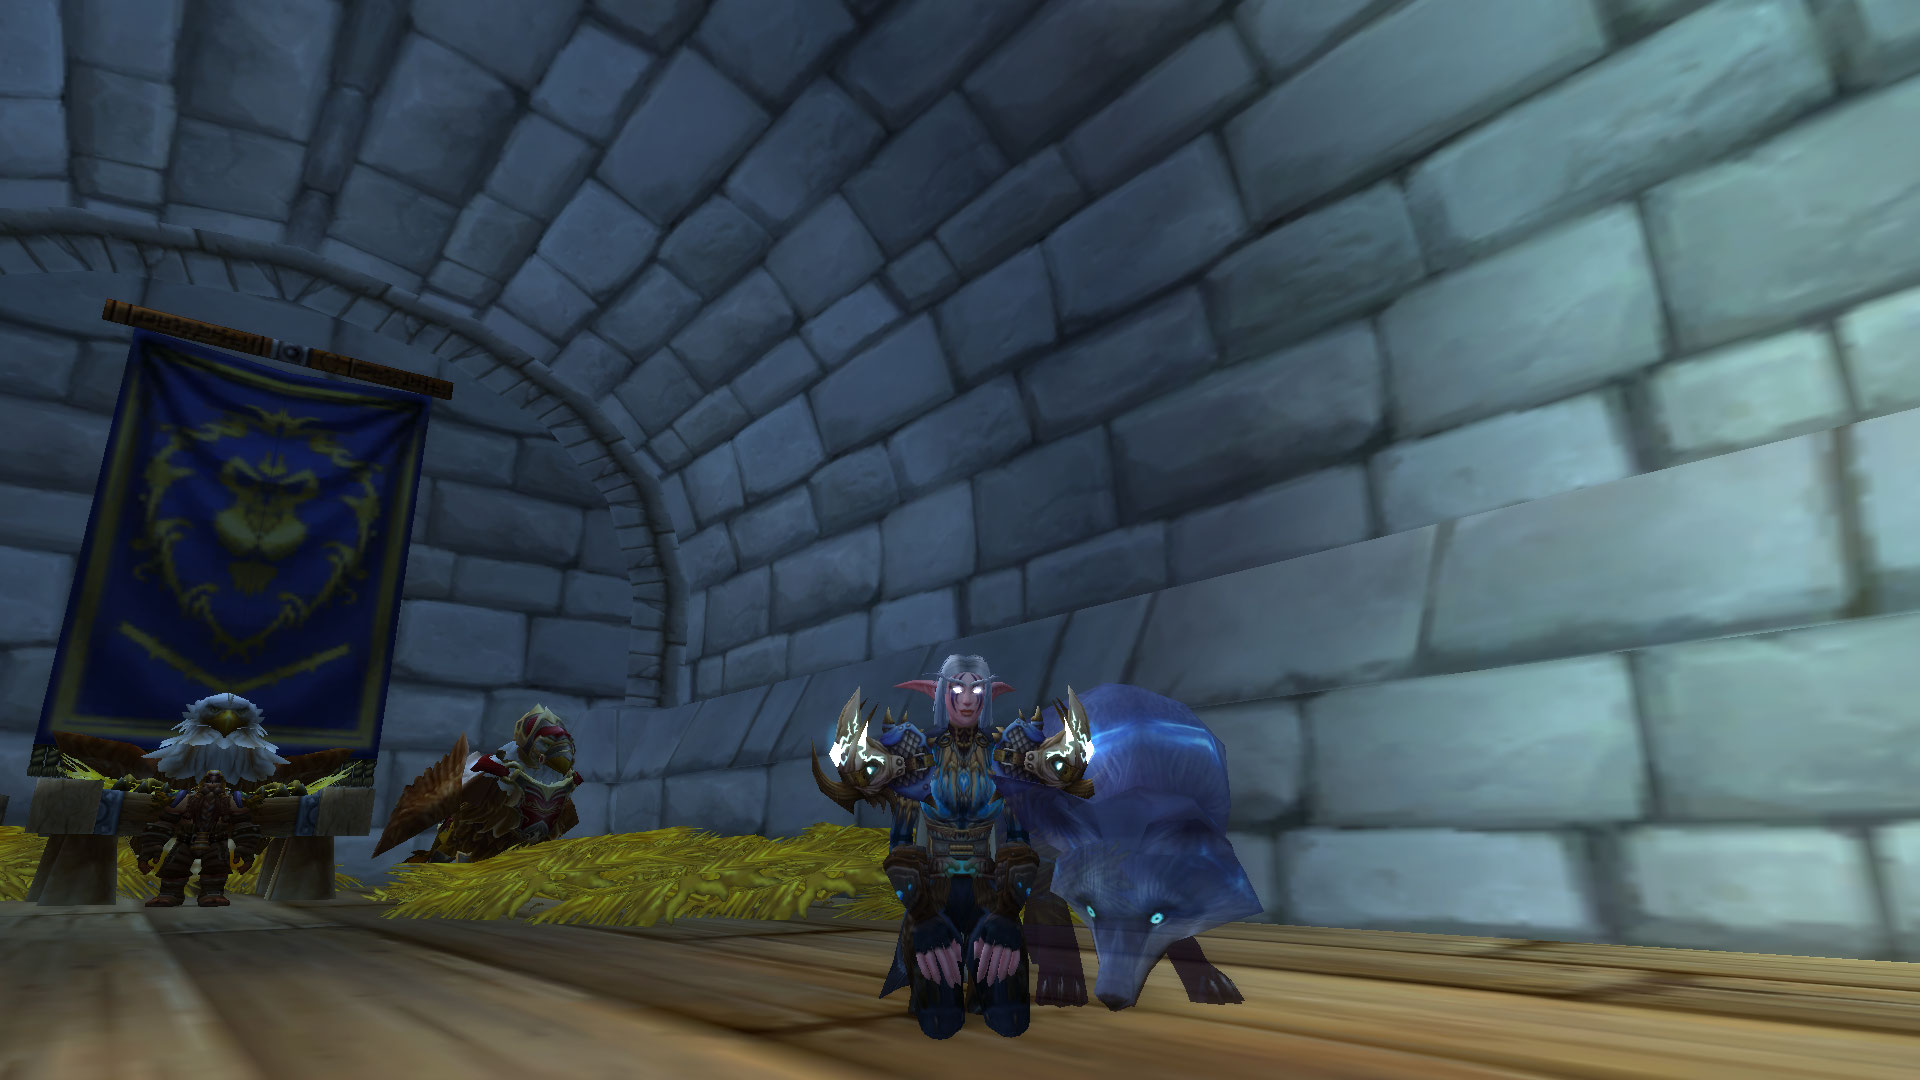 Myself with newly tamed surprise at the gryphon roost &lt;3